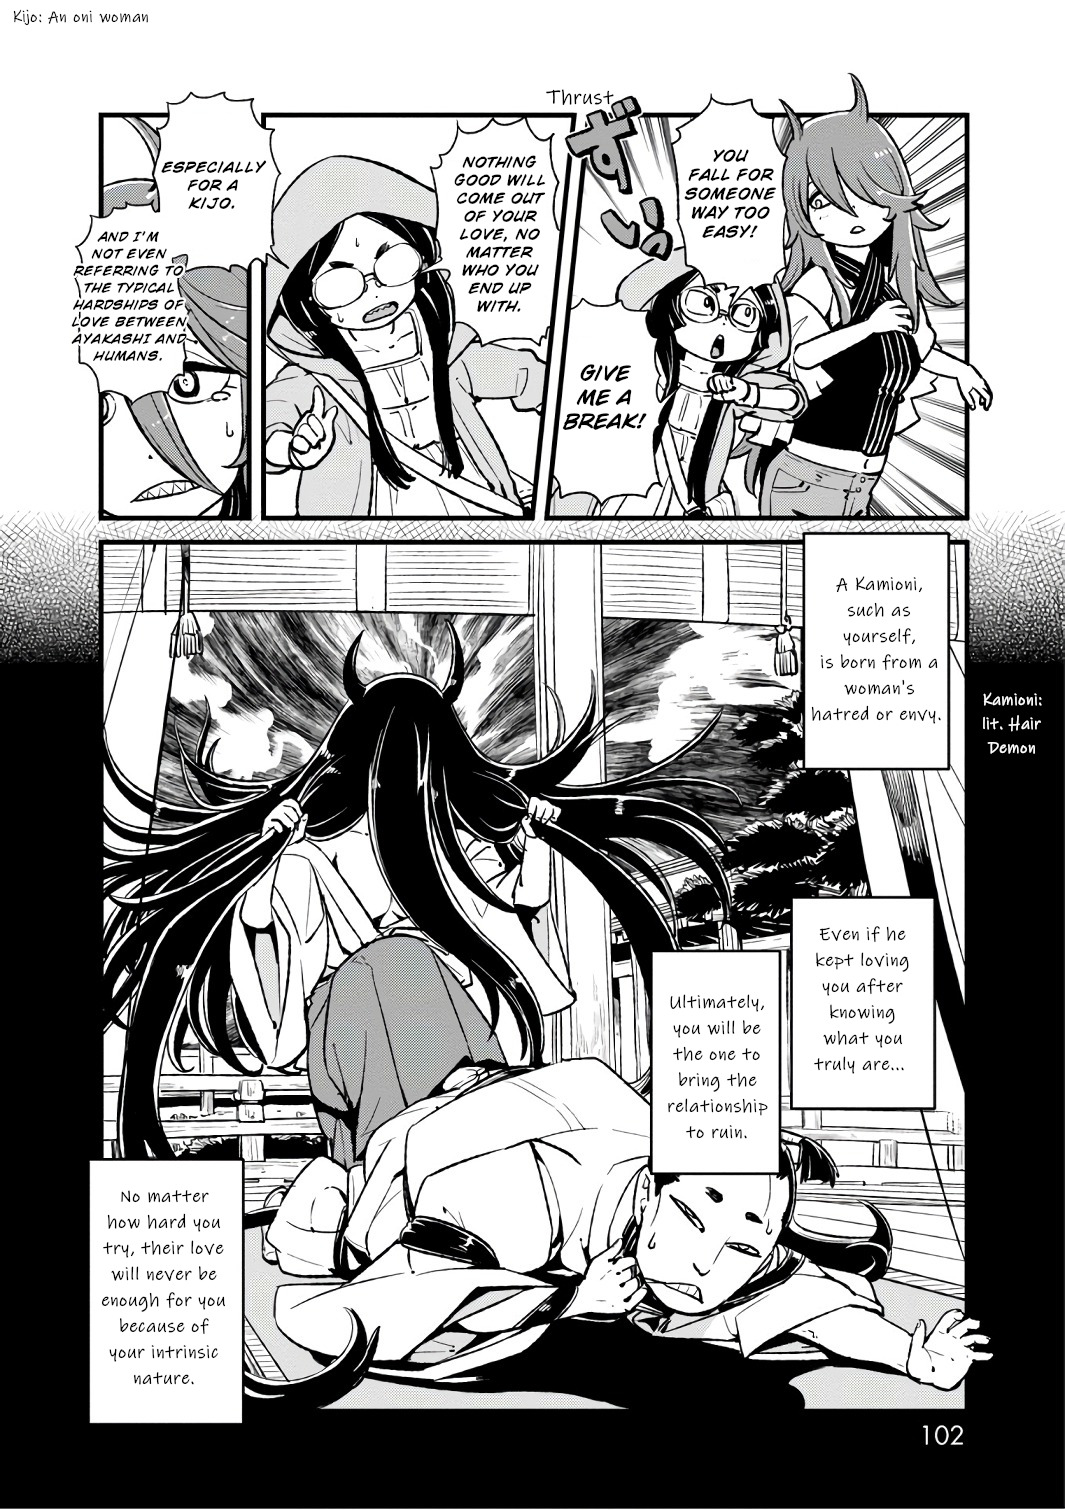 Neko Musume Michikusa Nikki Vol. 17 Ch. 104 Passing the Time Making Photocopies at the Convenience Store